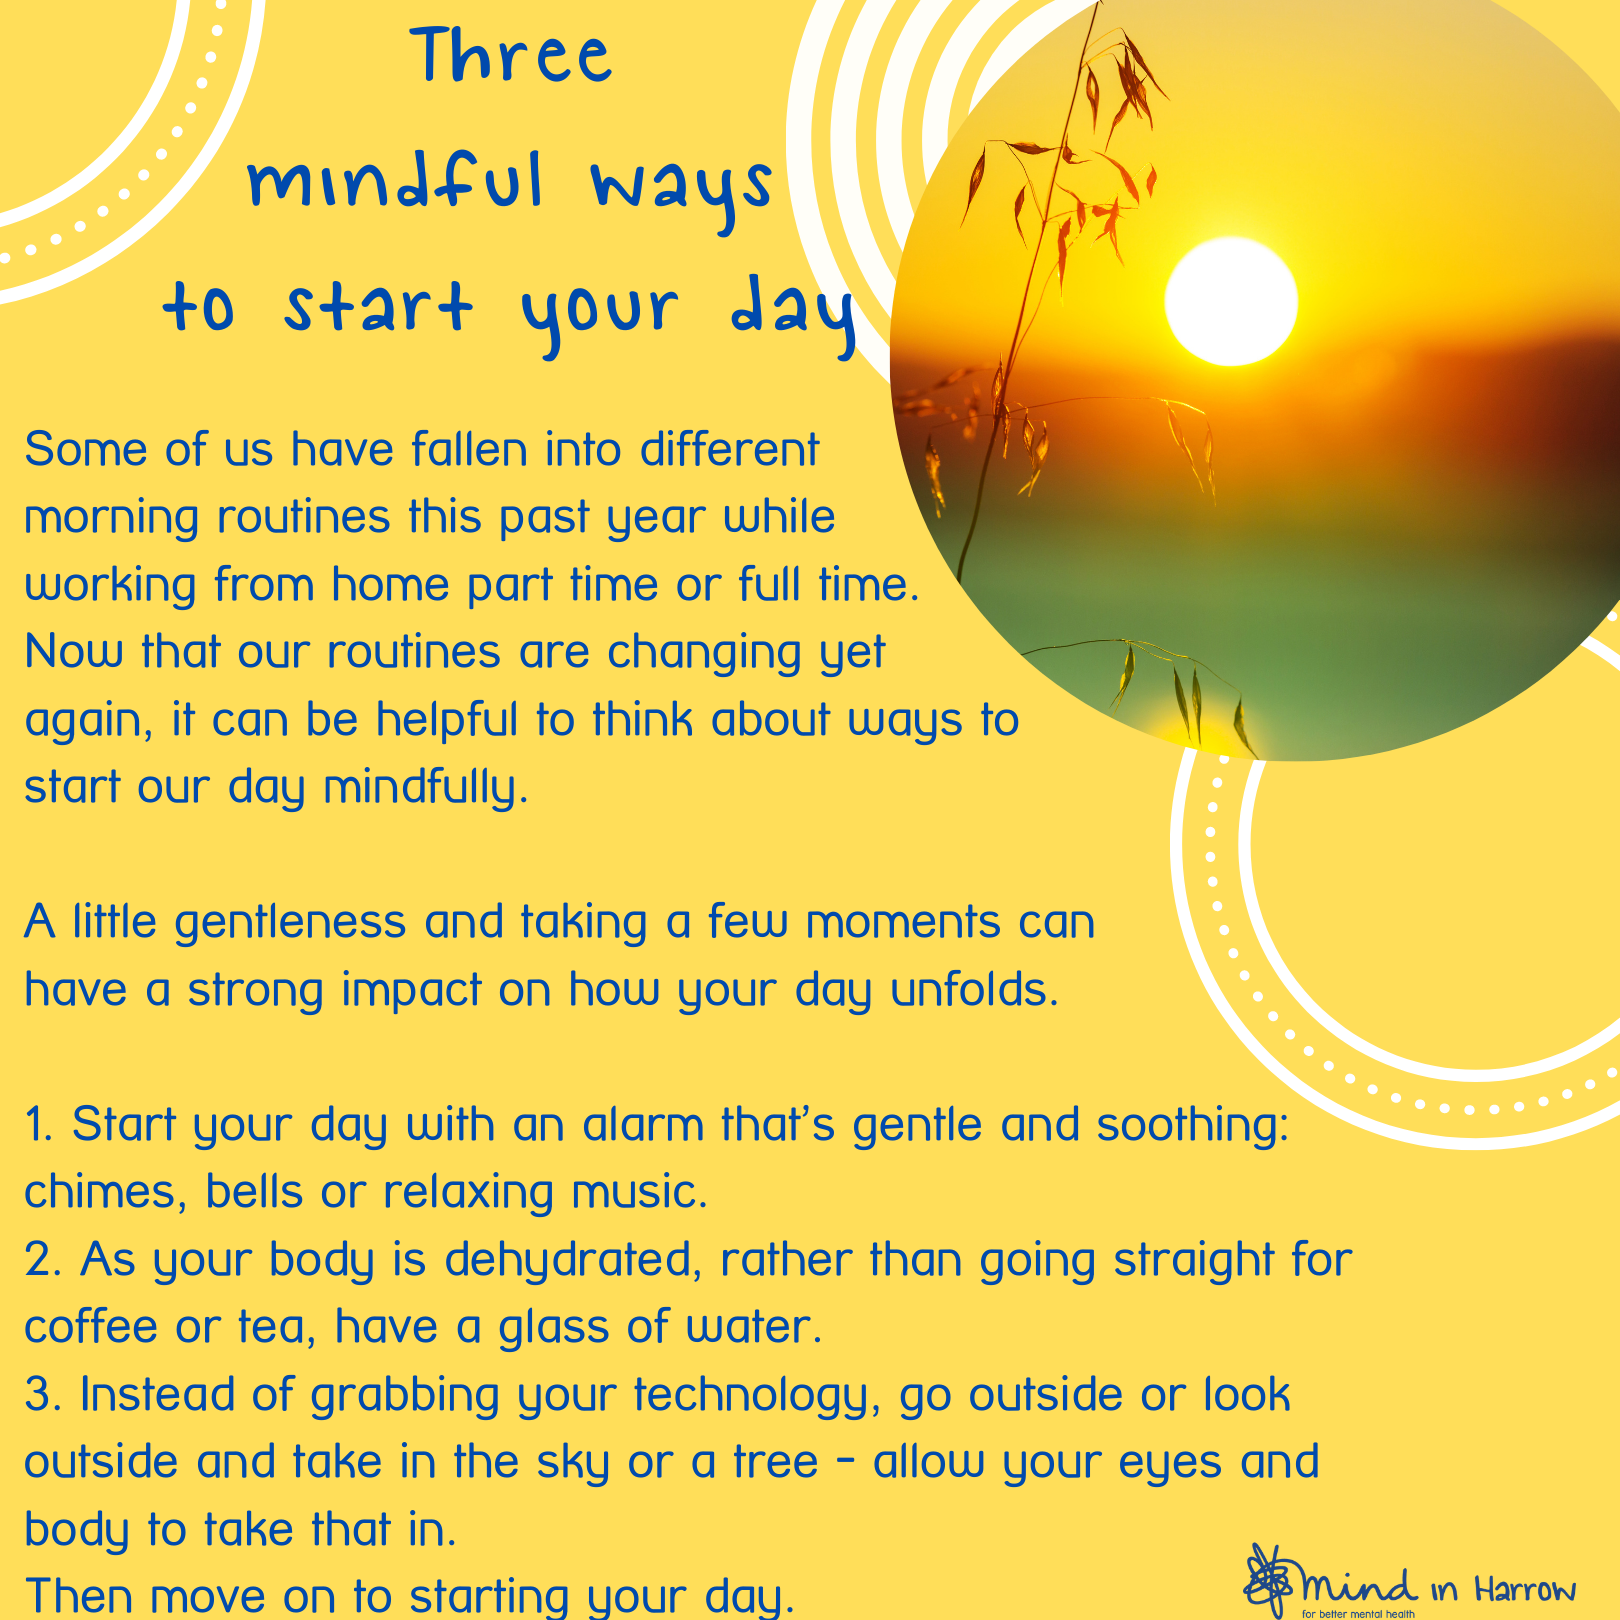 Three mindful ways to start your day